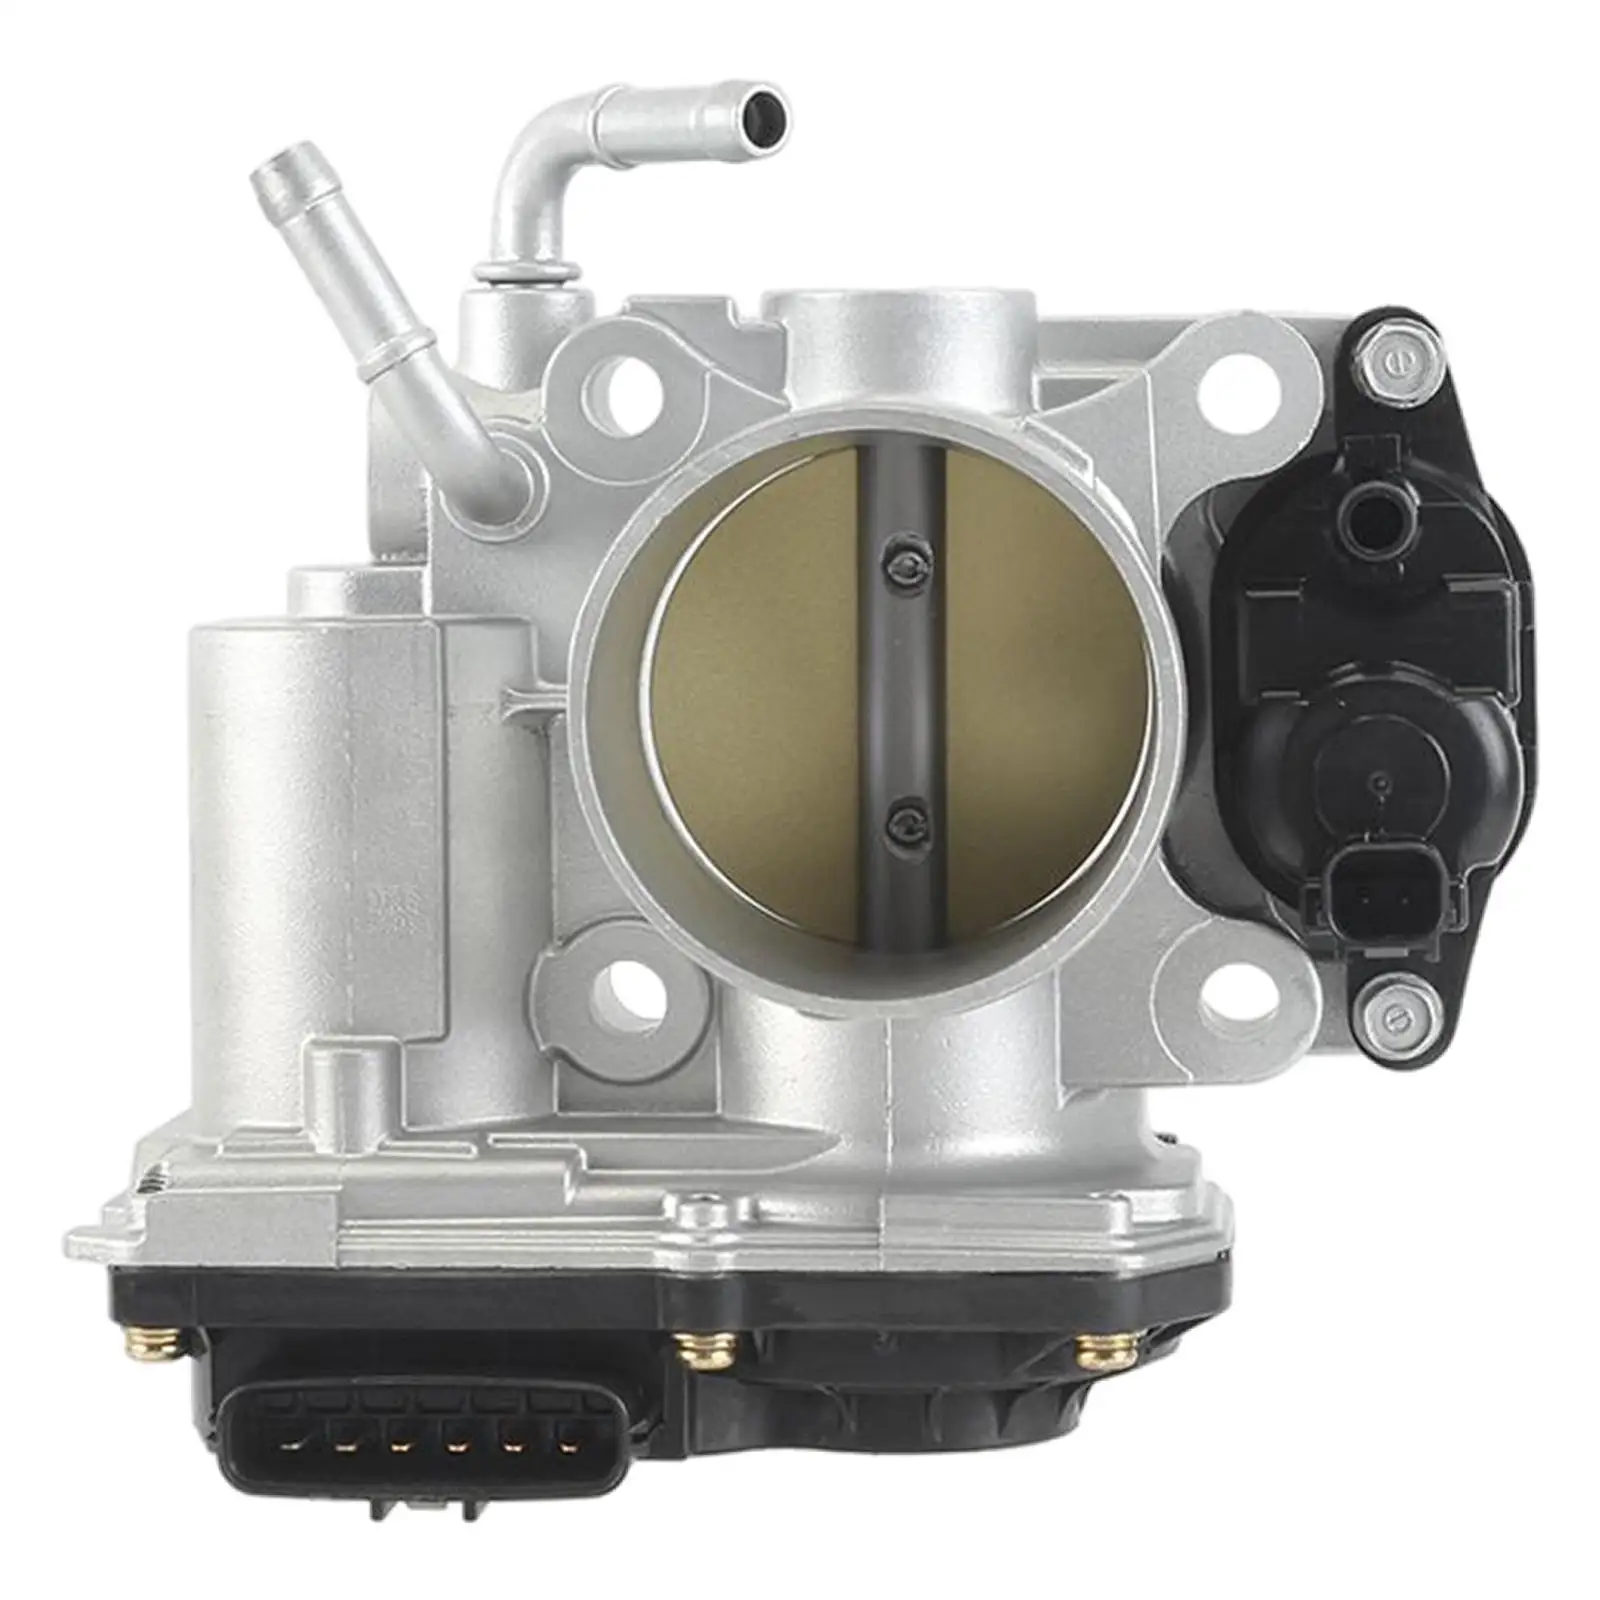 Throttle Body Fuel Injection 16400-Rnb-A01 Accessories Fit for Honda Civic 1.8L